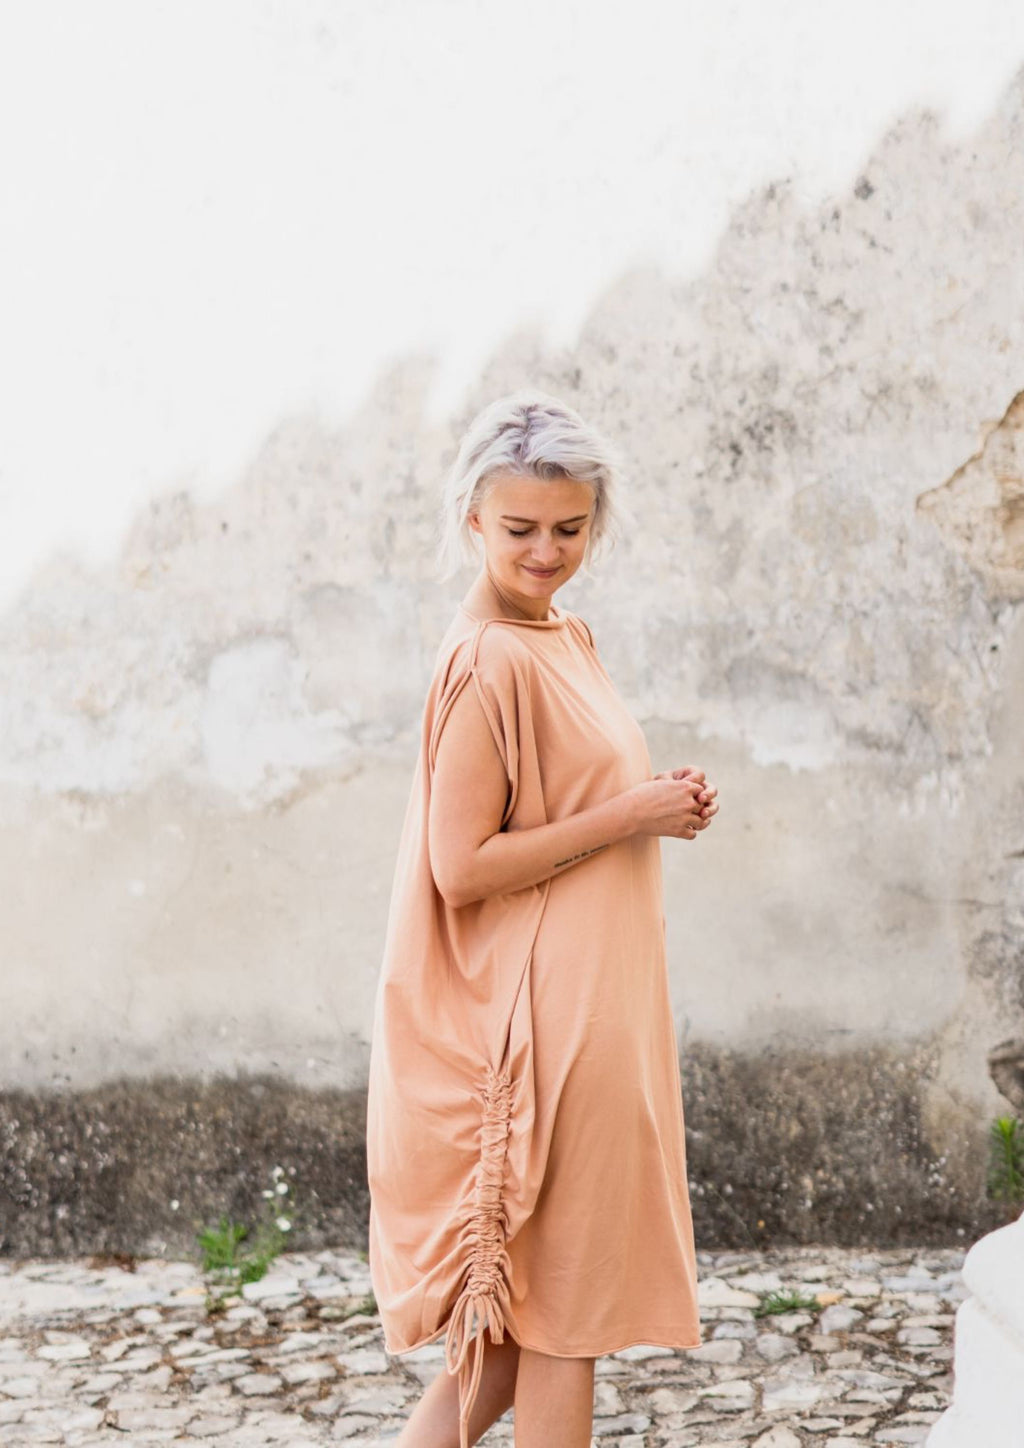 Multifunctional flowing and soft jersey. Can be worn as a dress, vest or poncho. With adjustable drawstring to regulate the shape. 100% organic cotton. Nude colour.